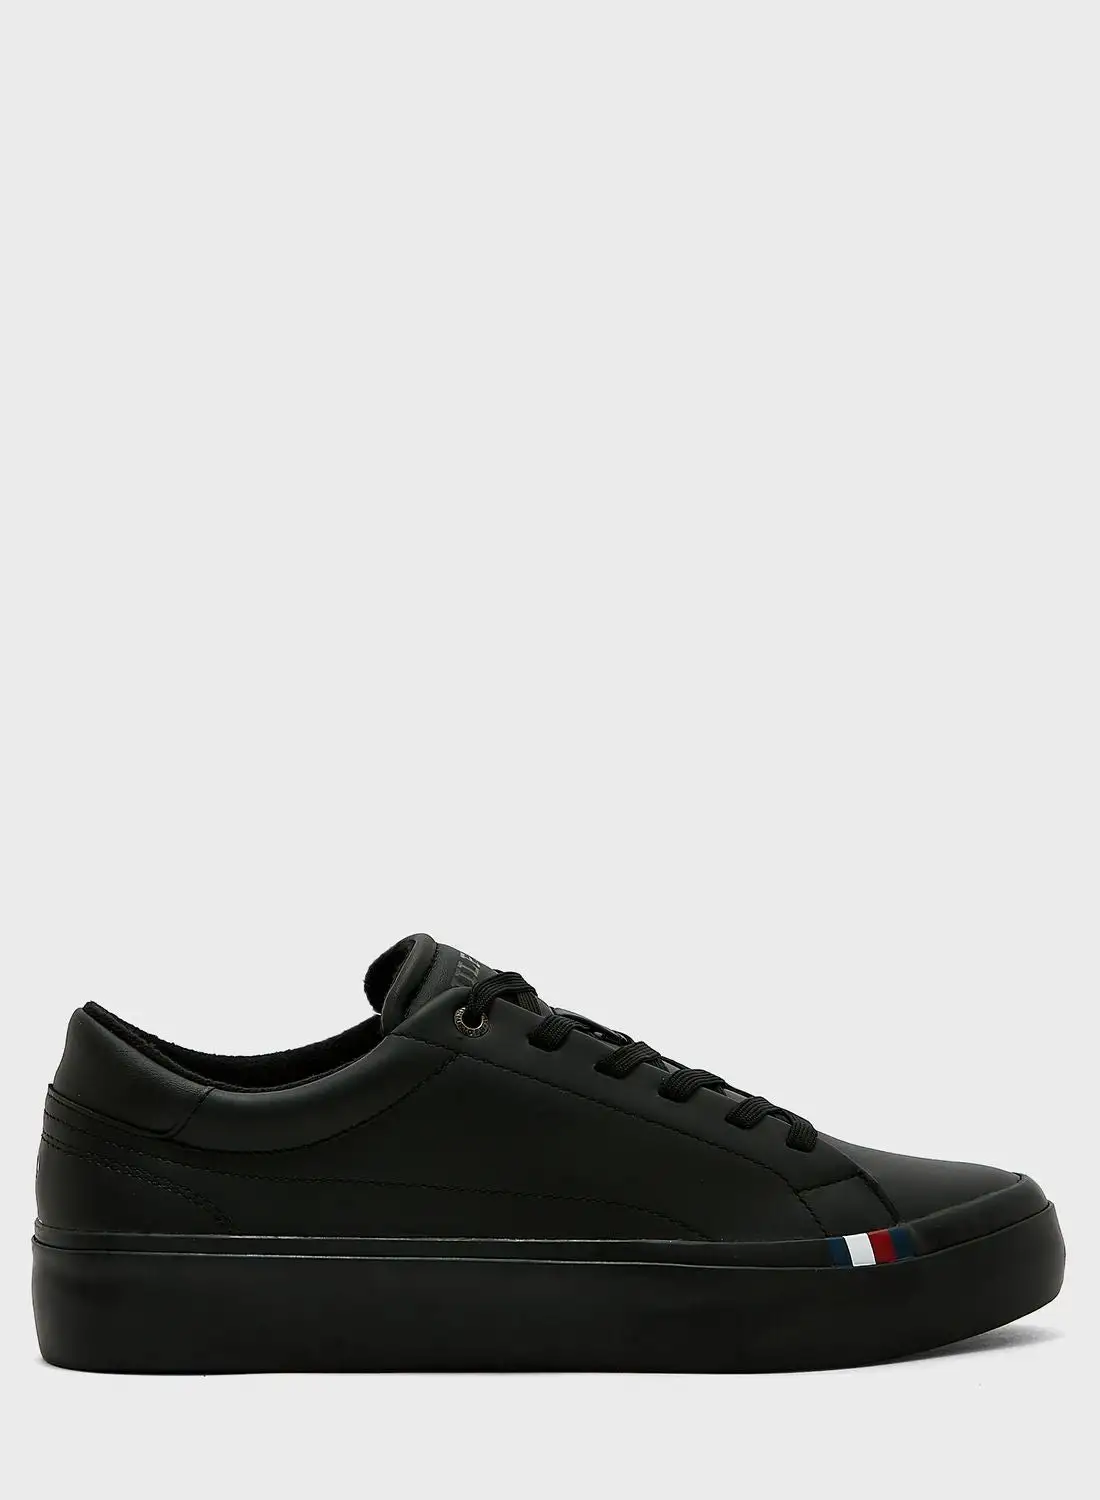 TOMMY HILFIGER Logo Low Top Sneakers